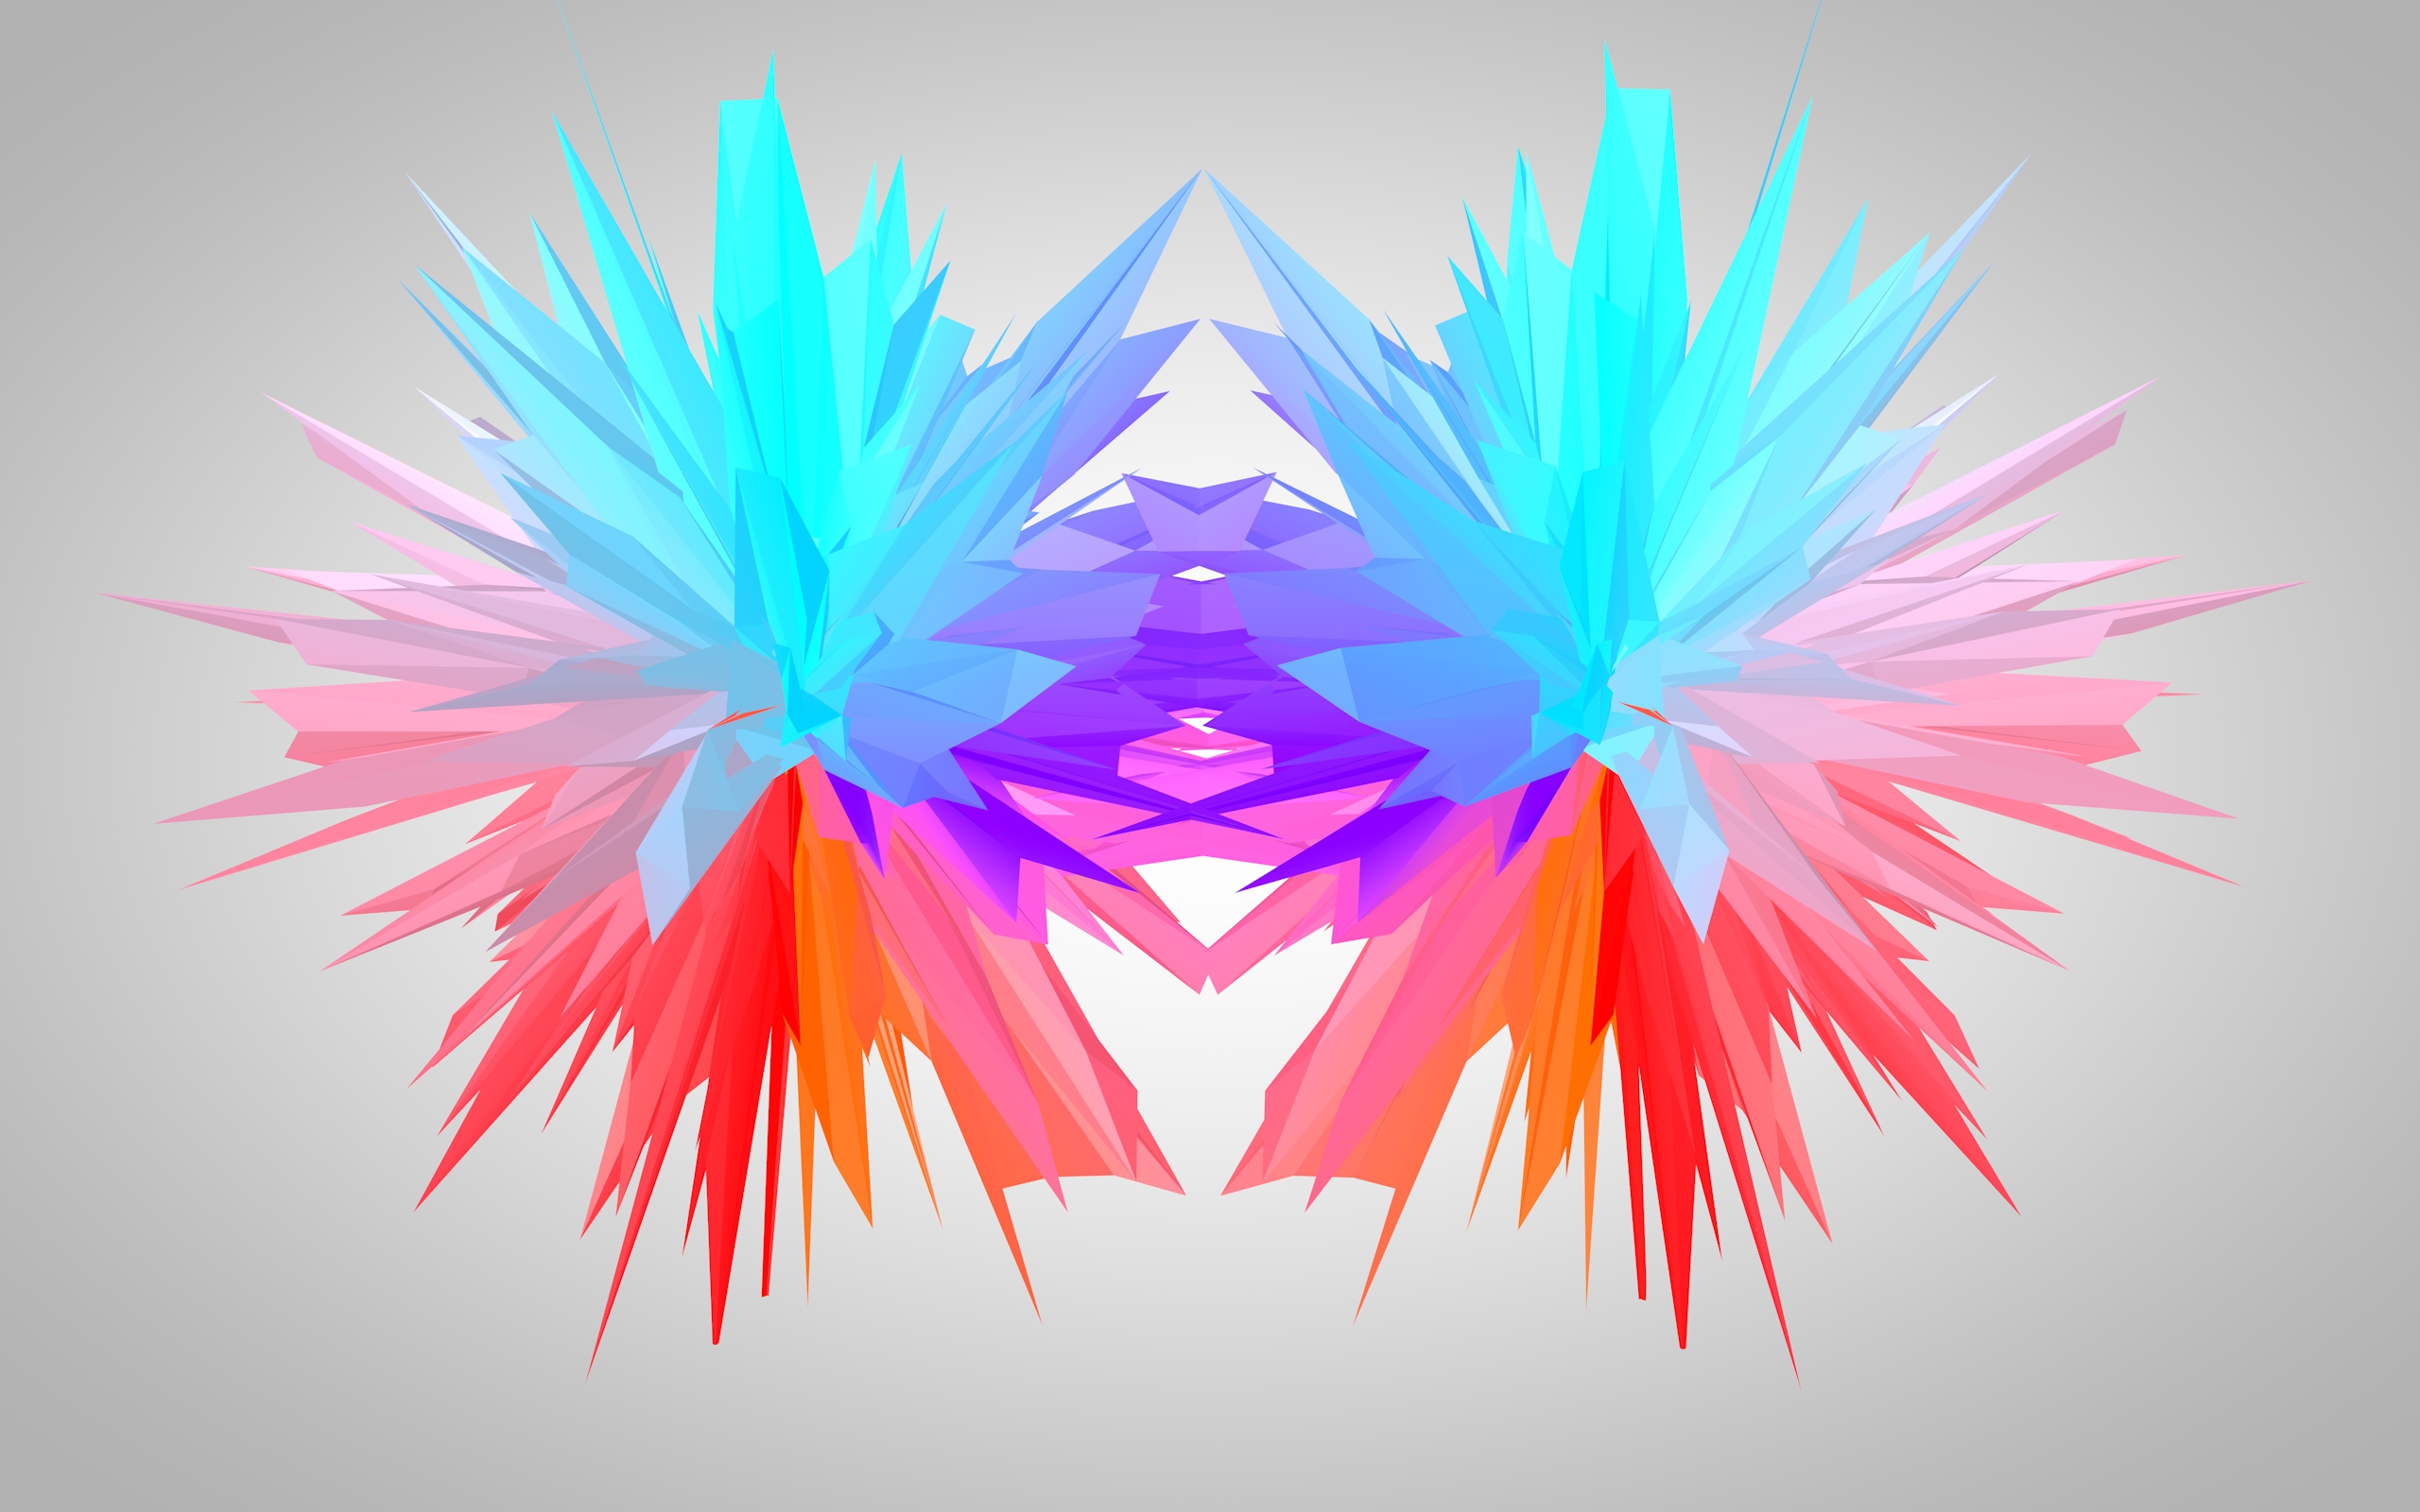 Low Poly Symmetry White Background By Sinisterbagel On